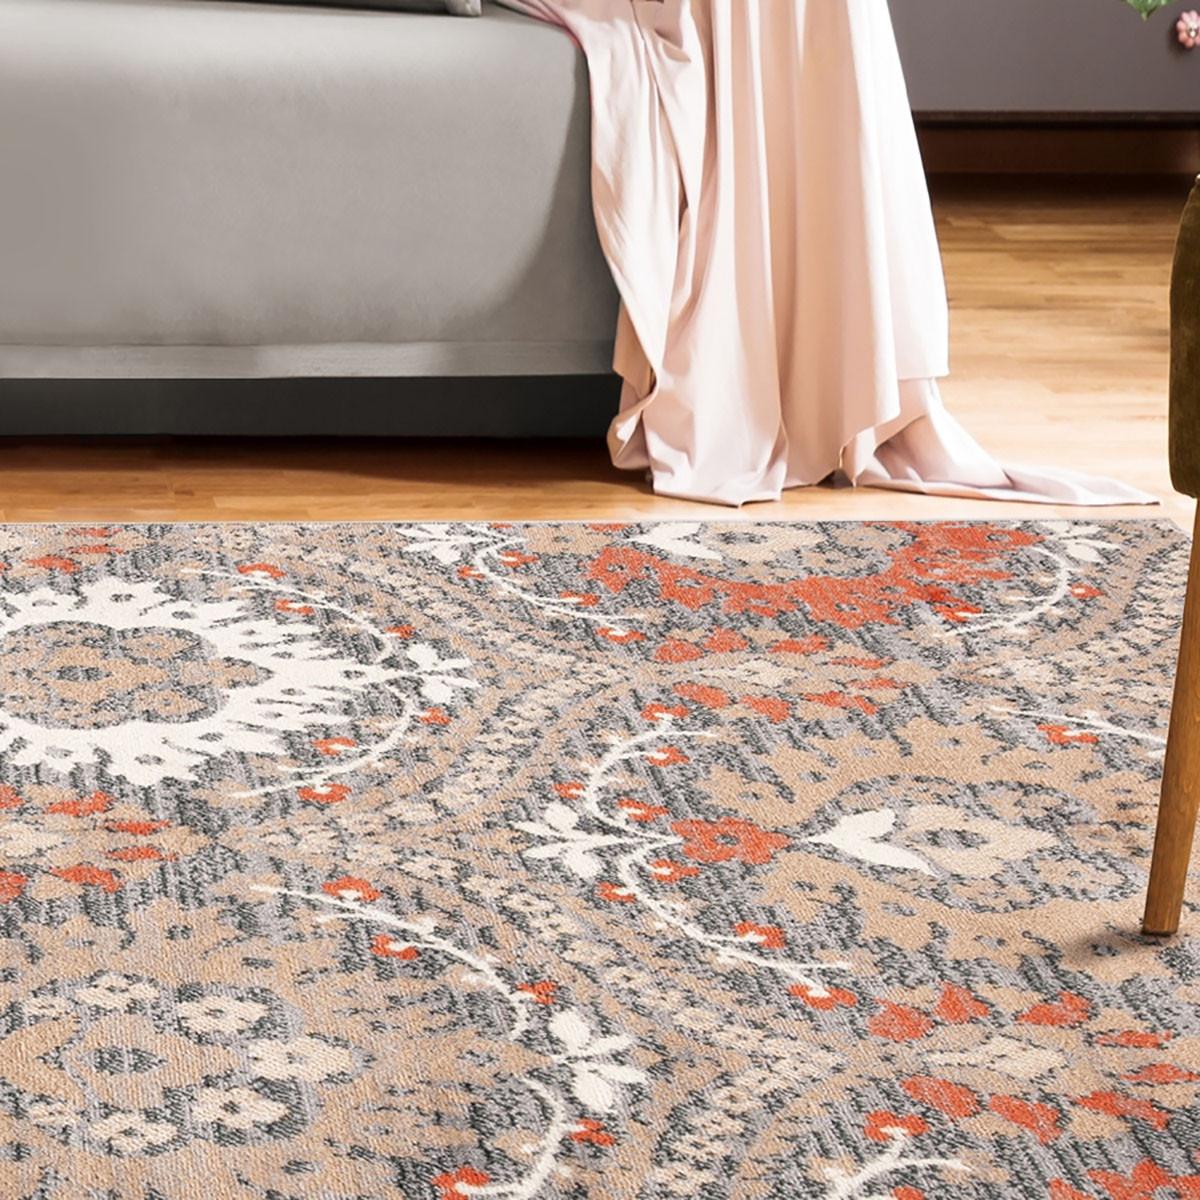 8' X 10' Rust Floral Stain Resistant Area Rug